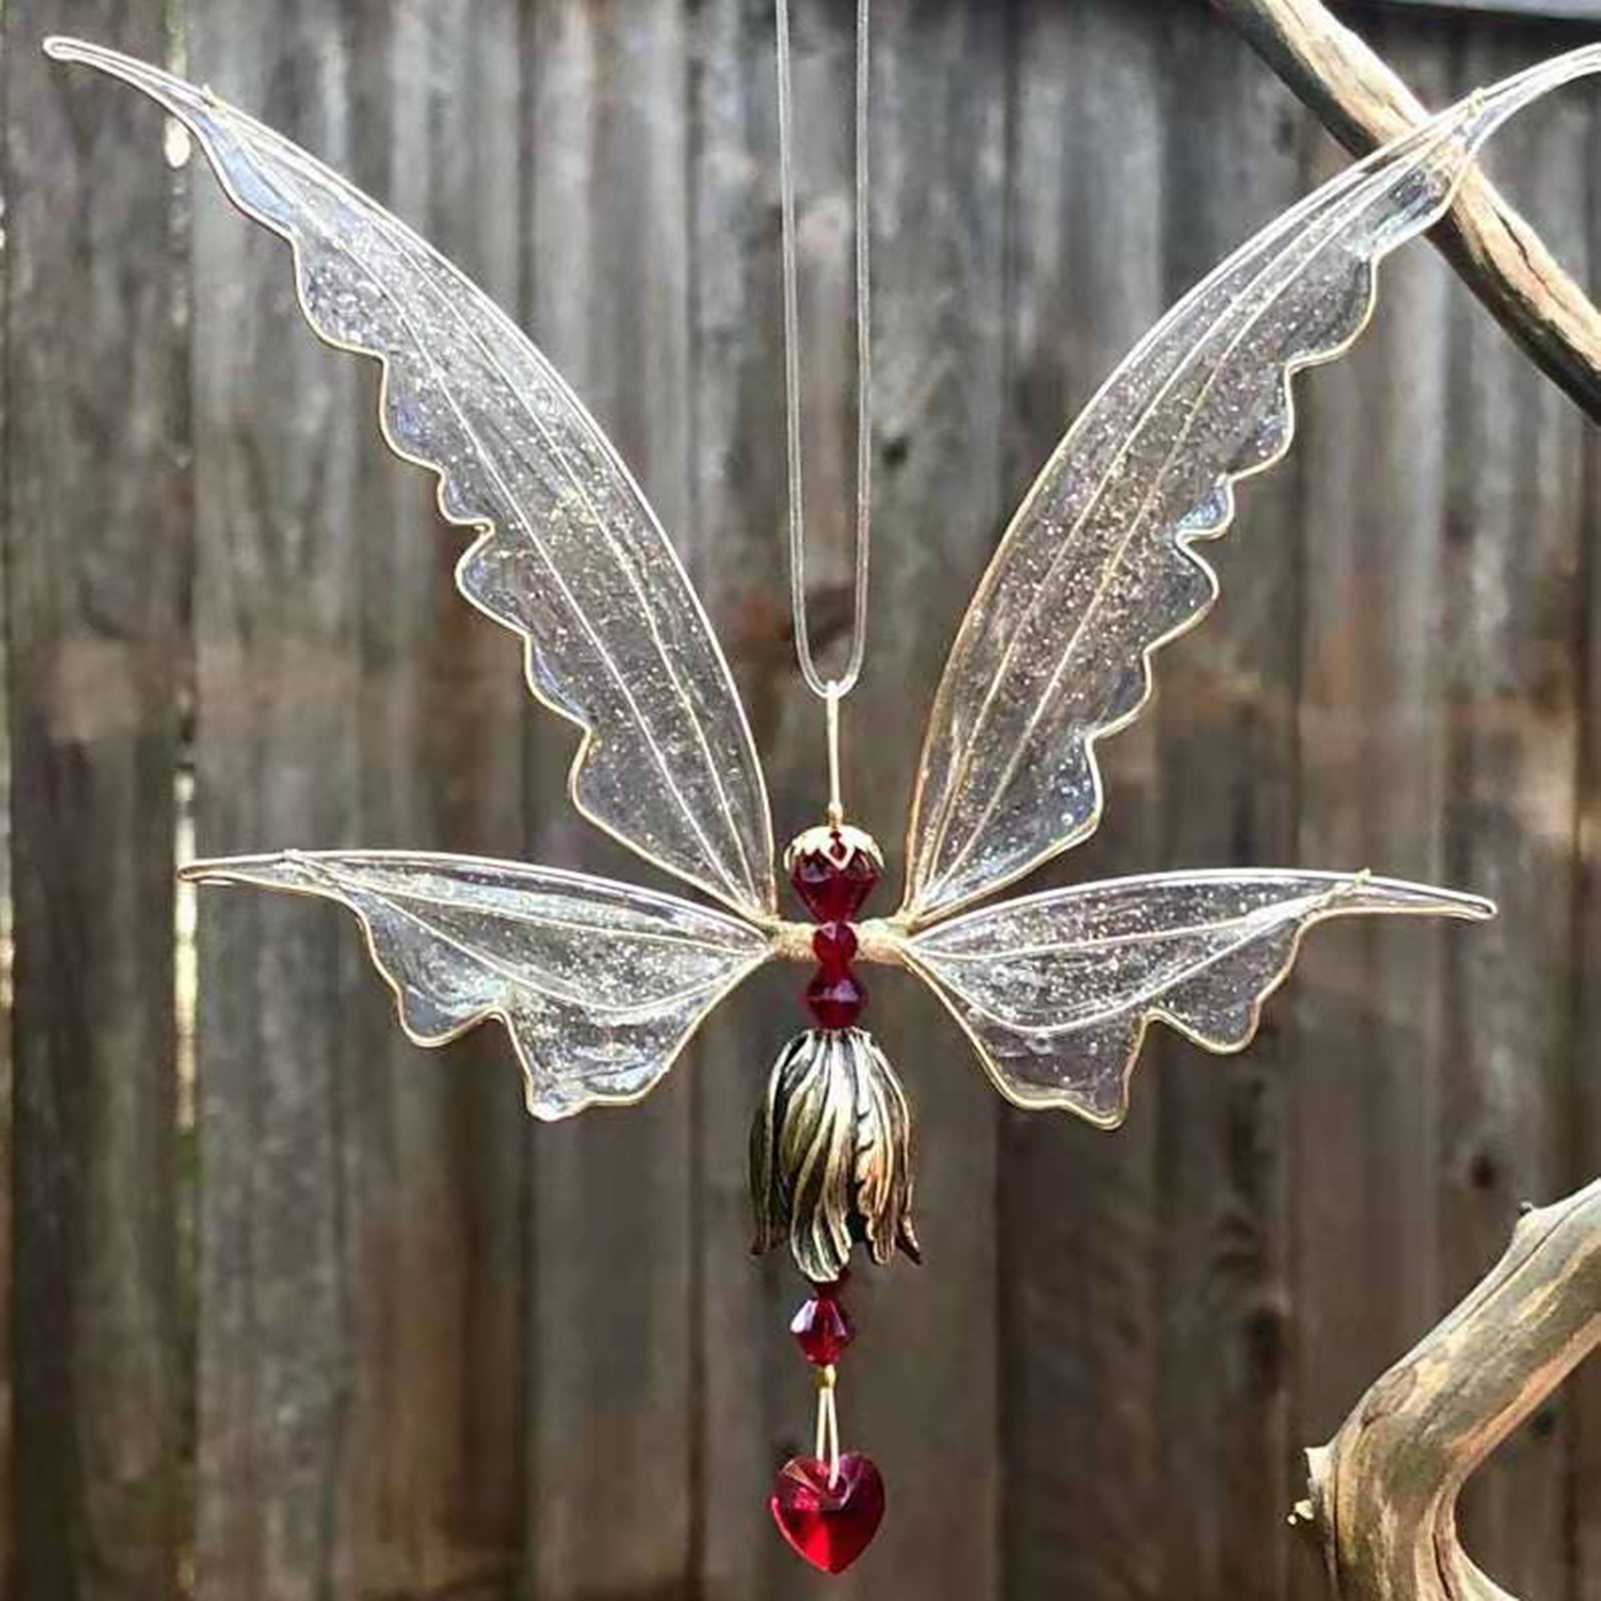 Angel Wings dragonfly Wind Chime - New Garden Art Metal Hanging